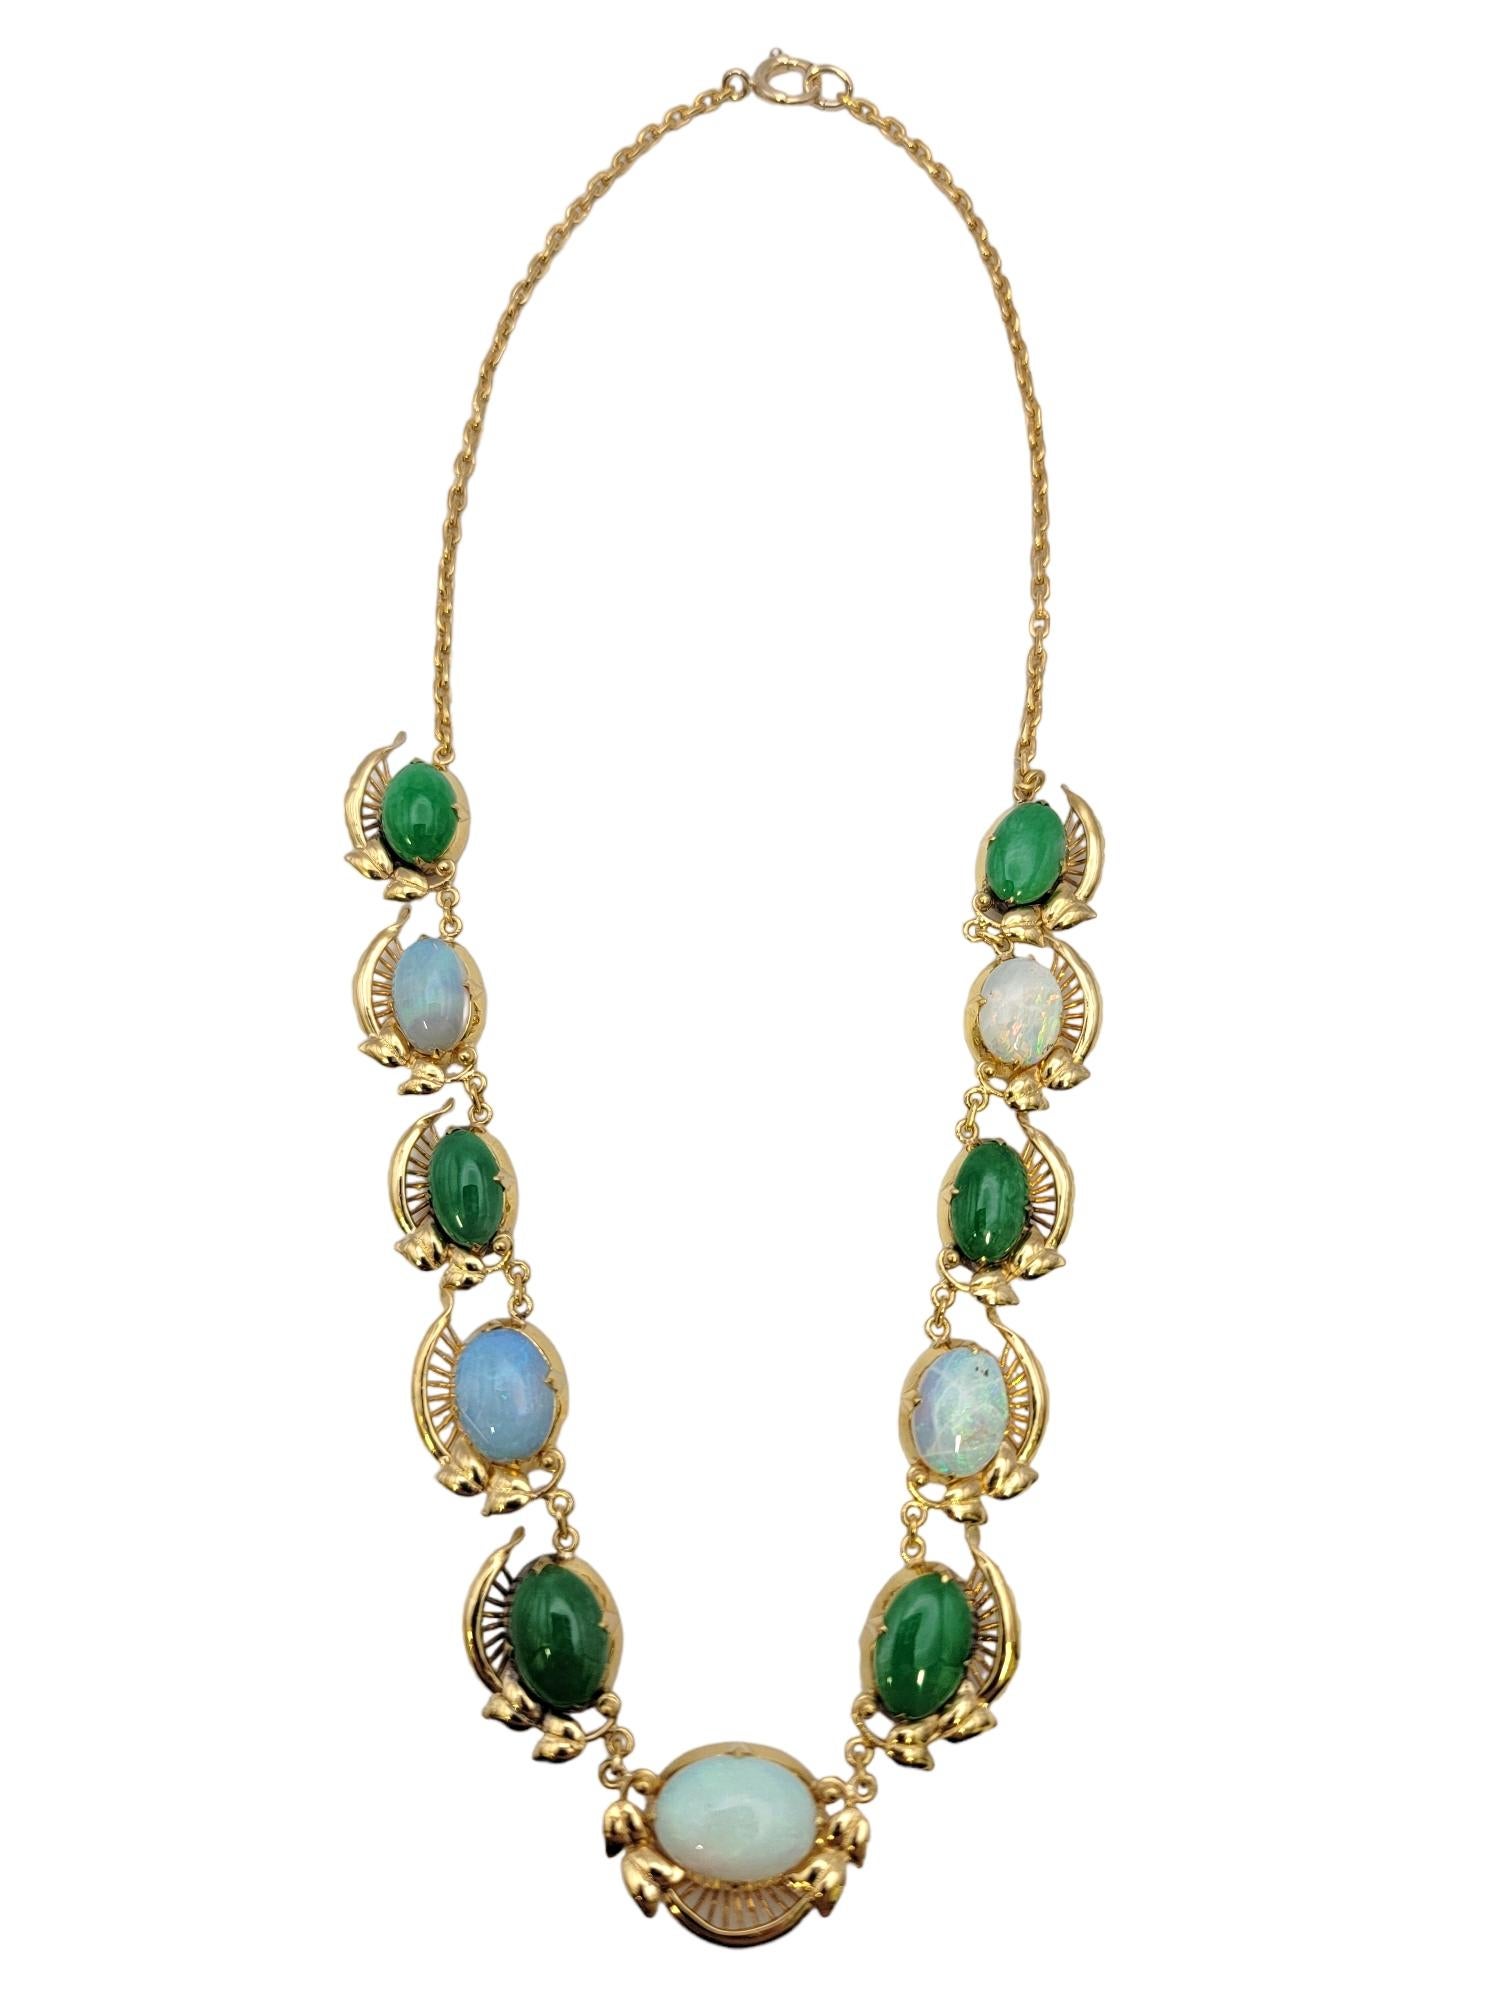 Graduated Oval Cabochon Jade and Opal Choker Necklace in Polished Yellow Gold For Sale 1